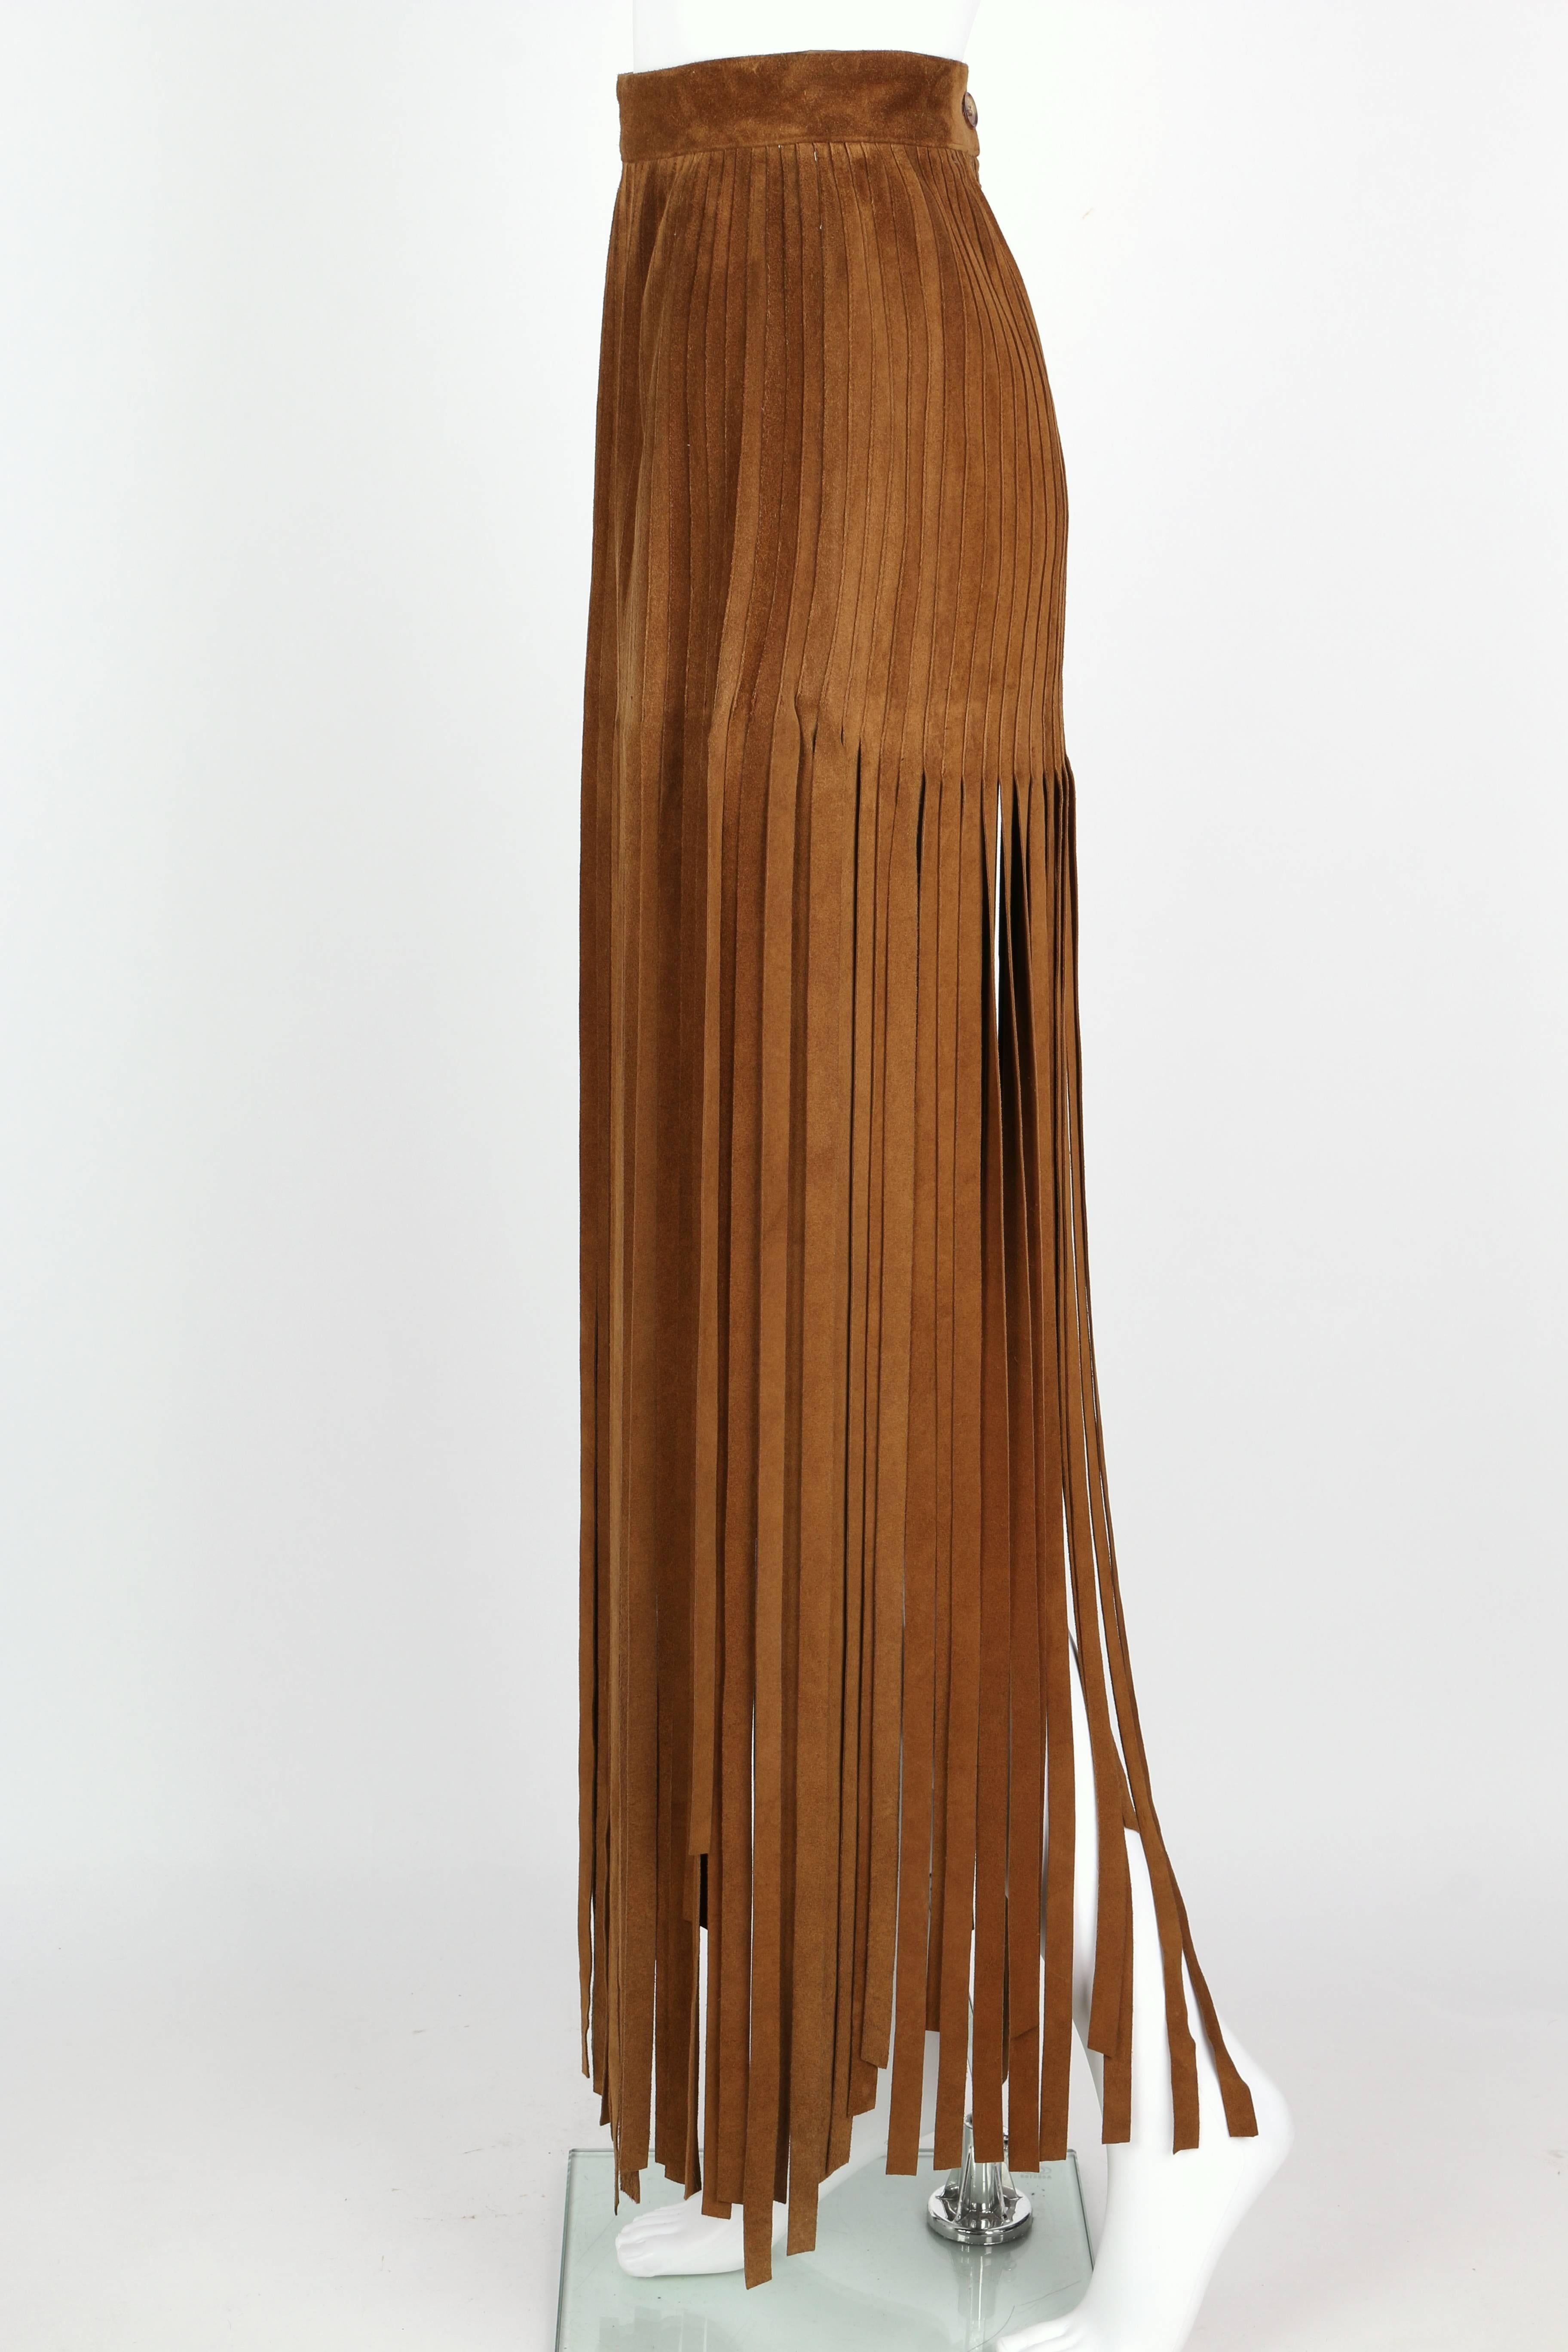 HERMES 1970s Brown Calf Skin Suede Leather Mini Long Maxi Fringe Skirt Size 38 In Excellent Condition In Thiensville, WI